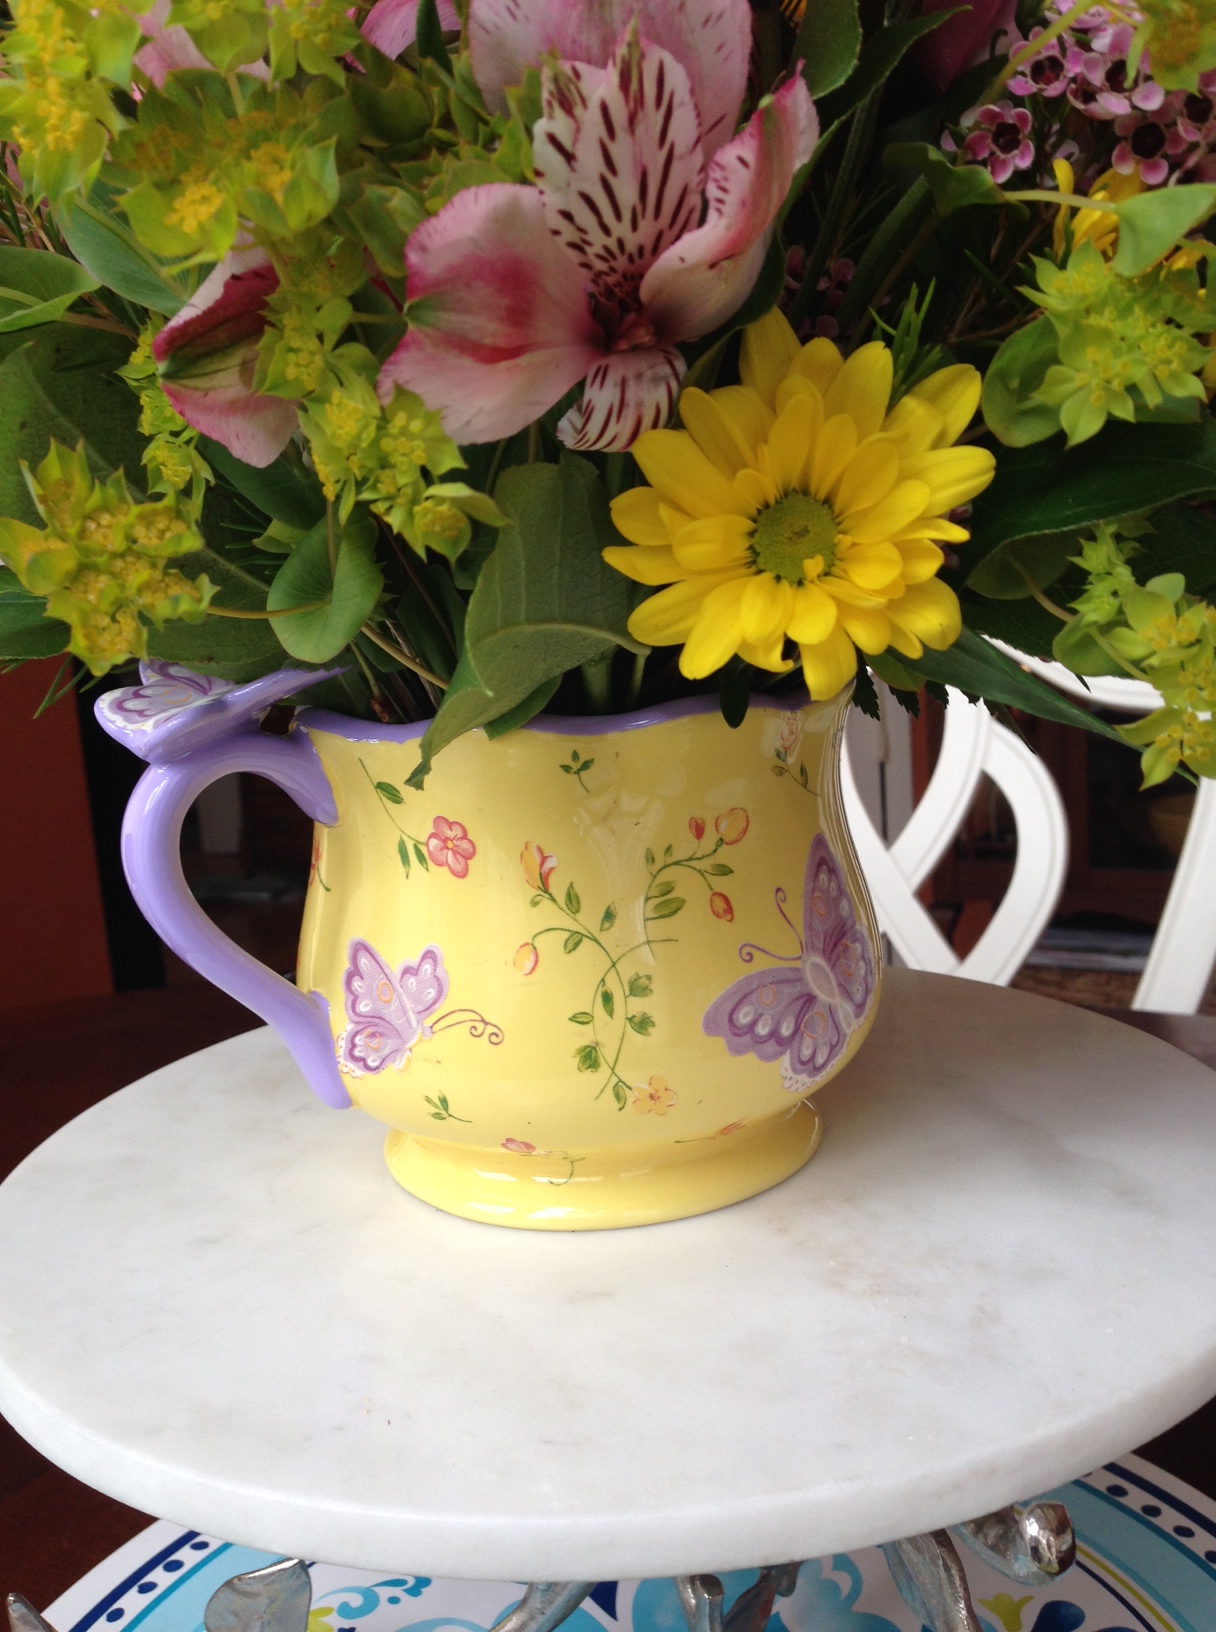 Butterfly Serenity Bouquet comes with an oversized mug adorned with purple butterflies